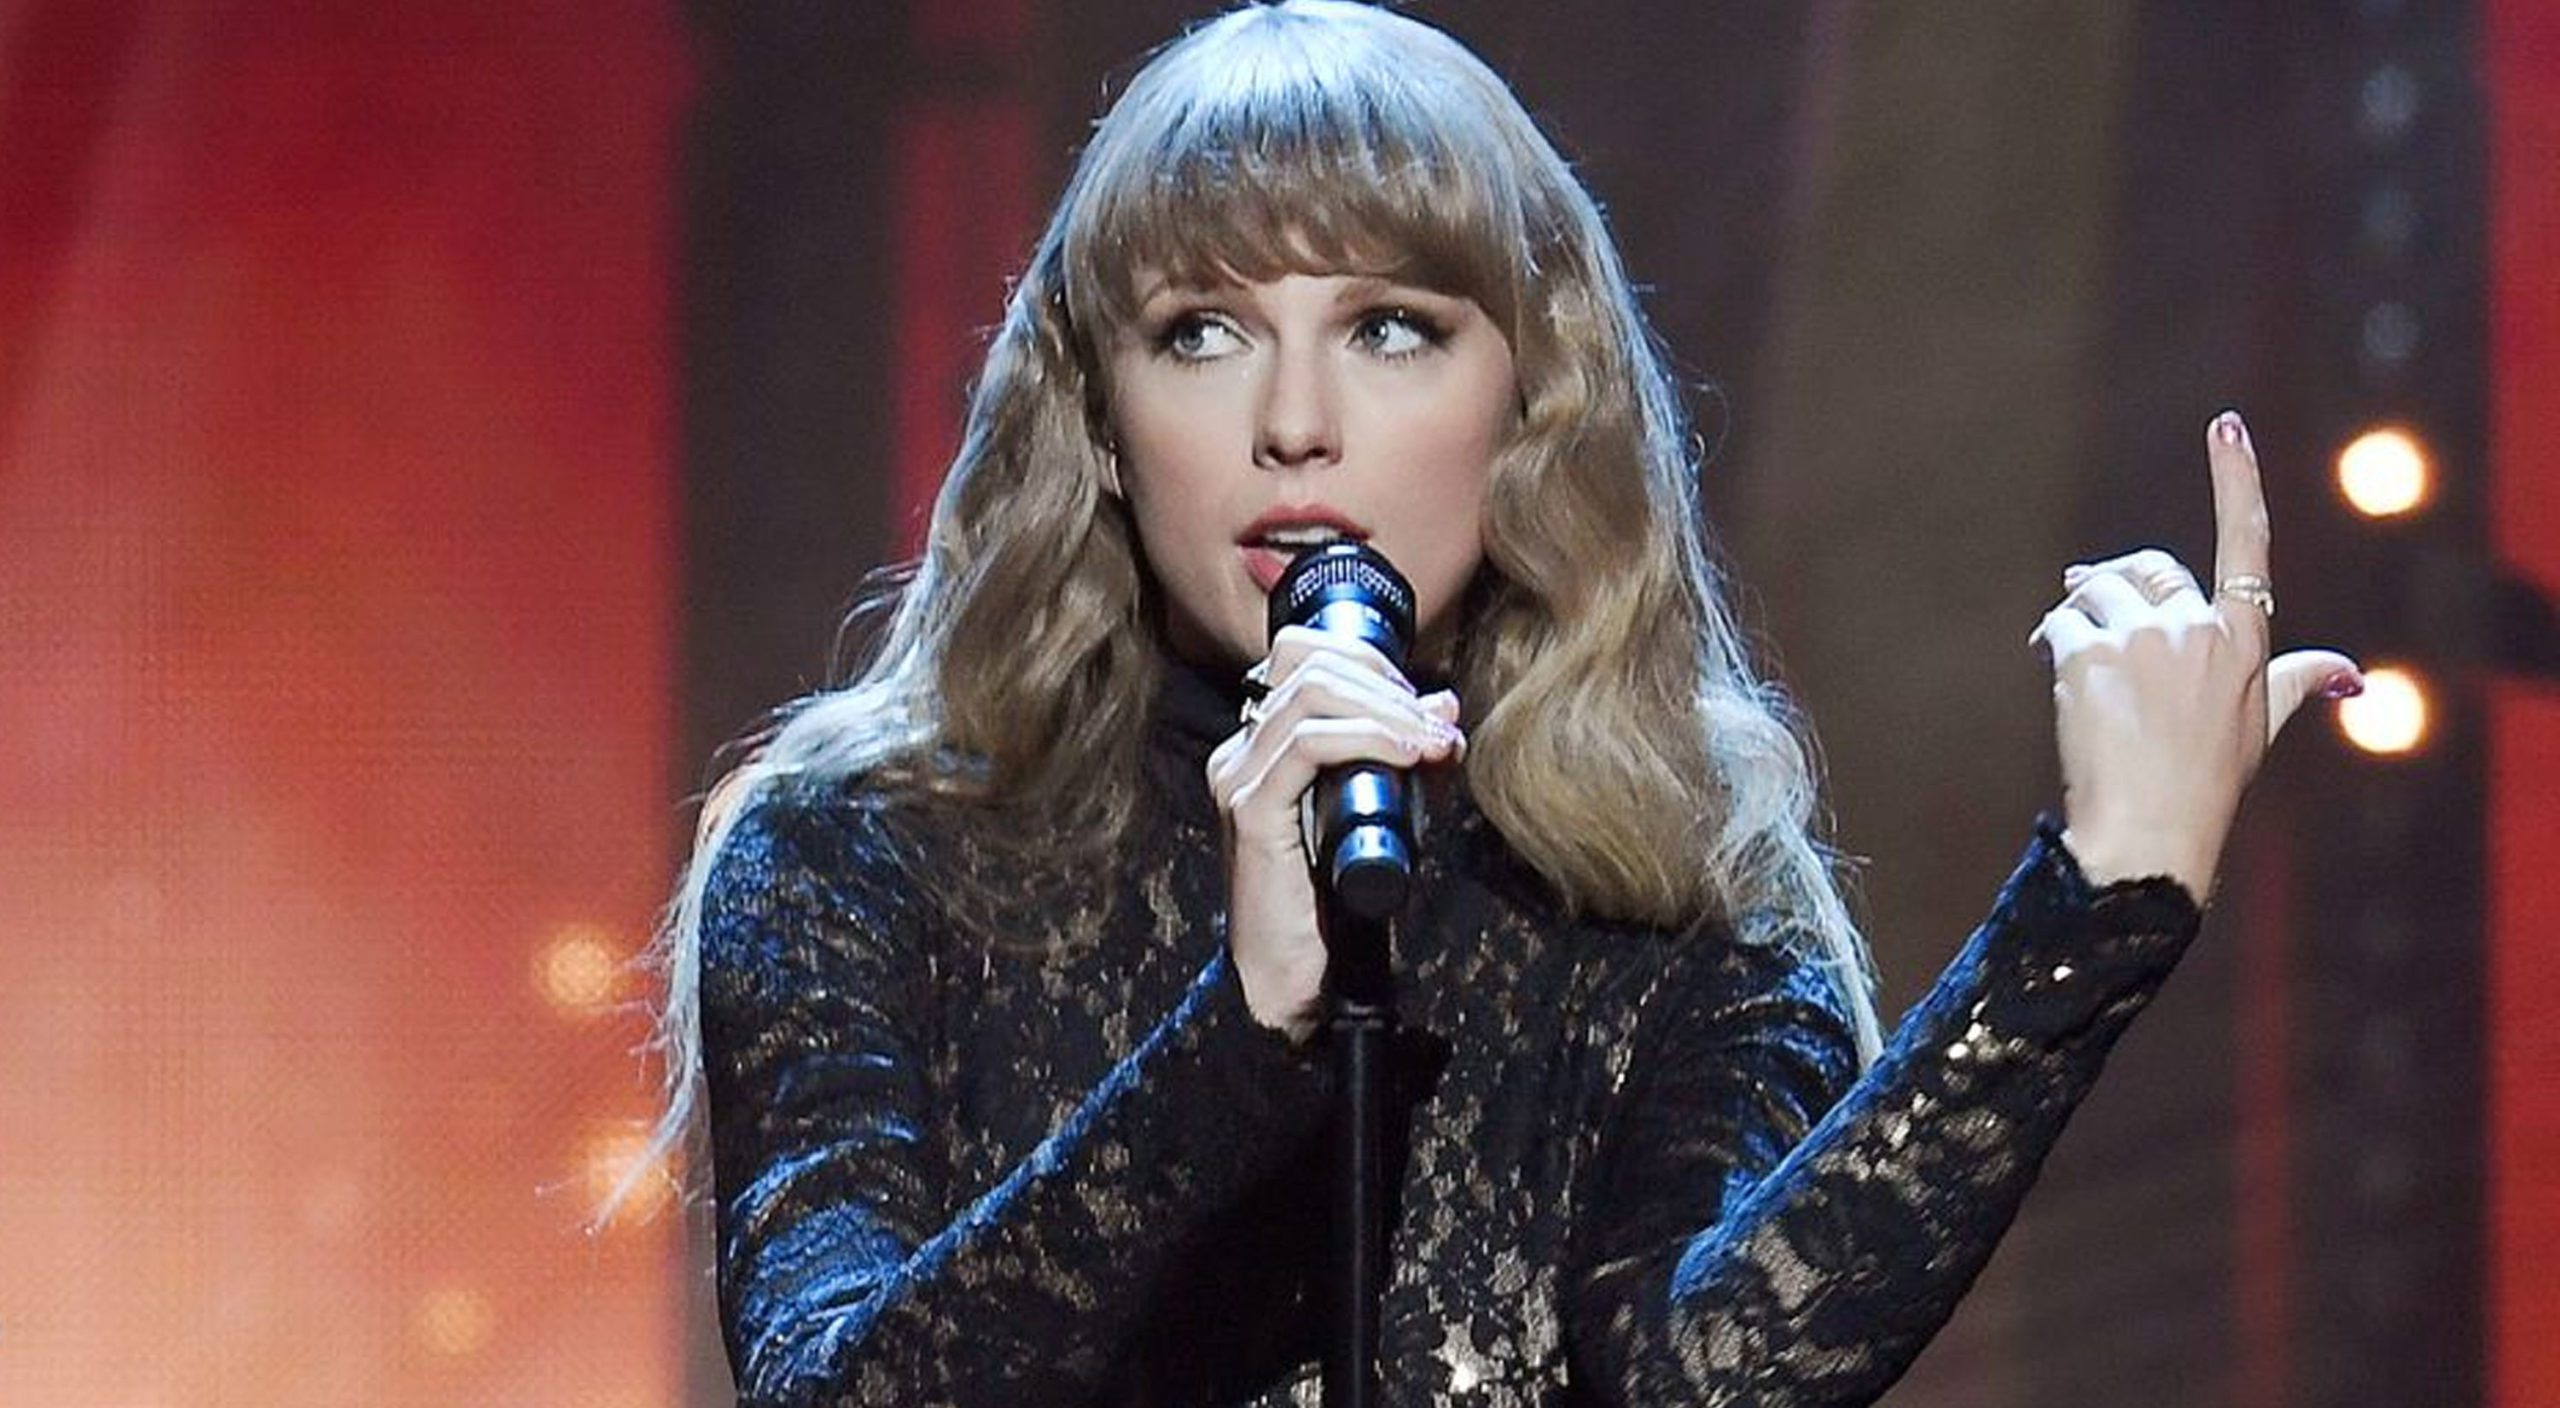 Taylor Swift performs during the Rock and Roll Hall of Fame induction ceremony. Source: Reuters.